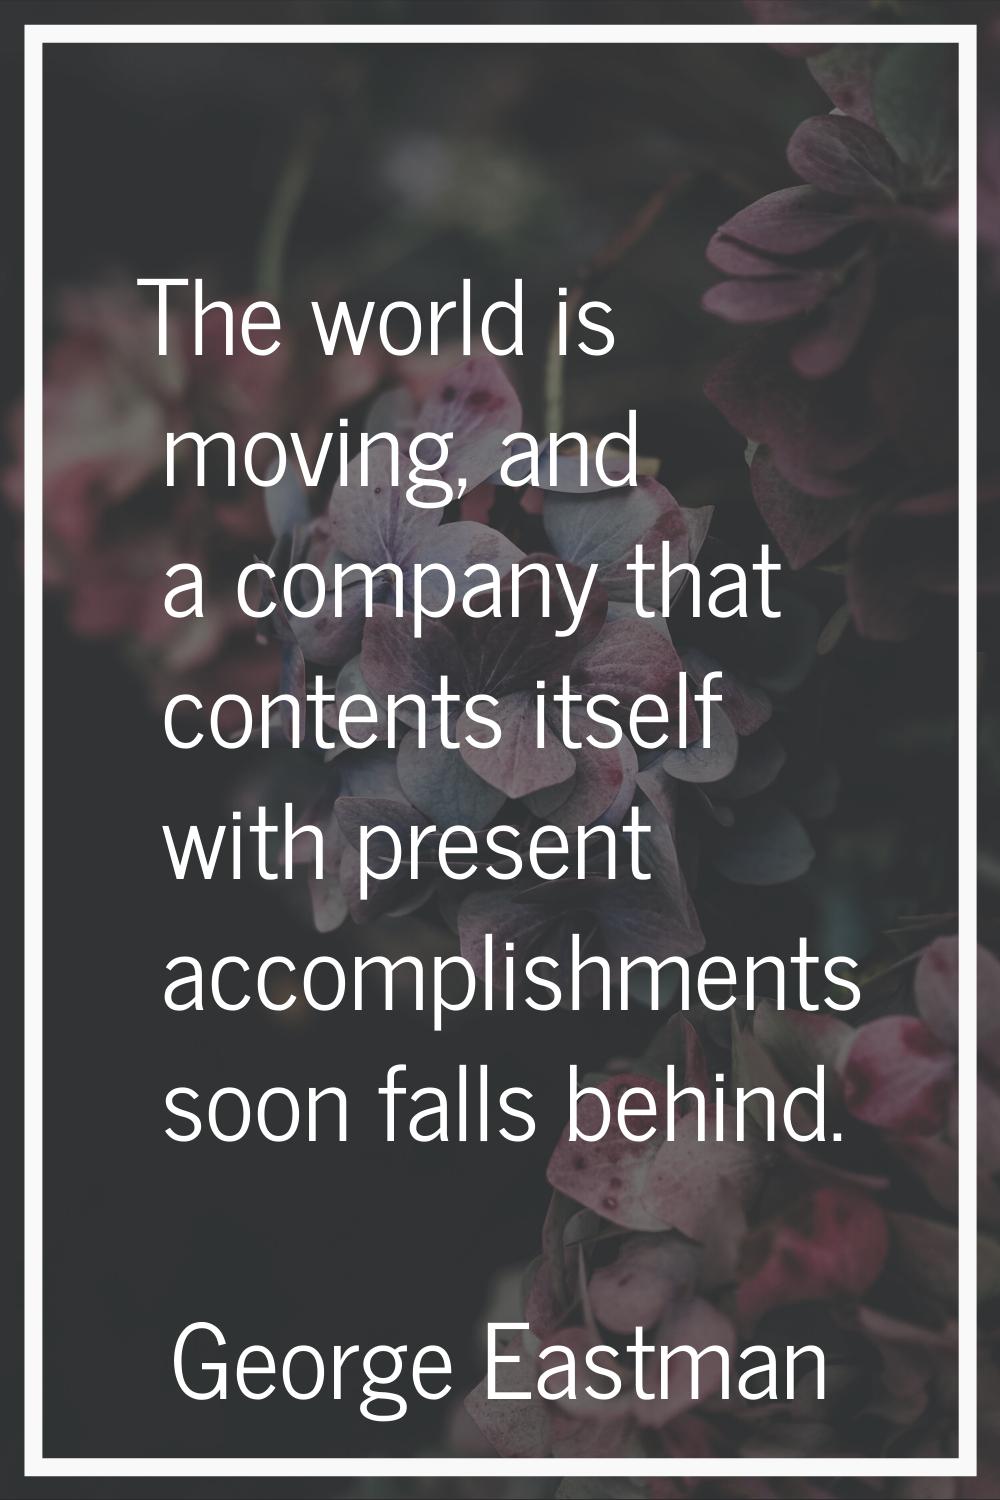 The world is moving, and a company that contents itself with present accomplishments soon falls beh